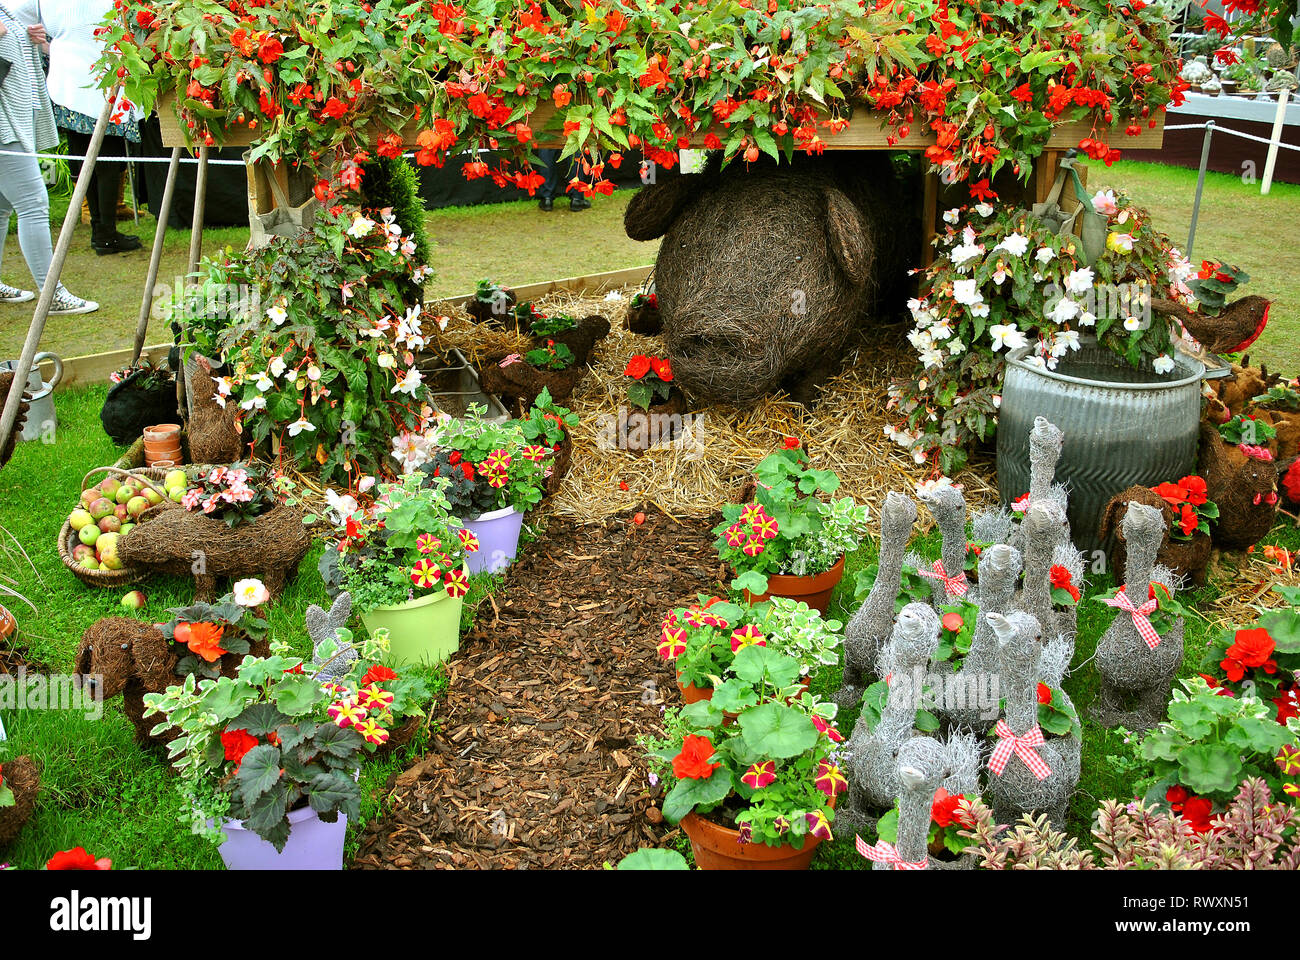 Farm animals garden display at Southport Flower Show Stock Photo